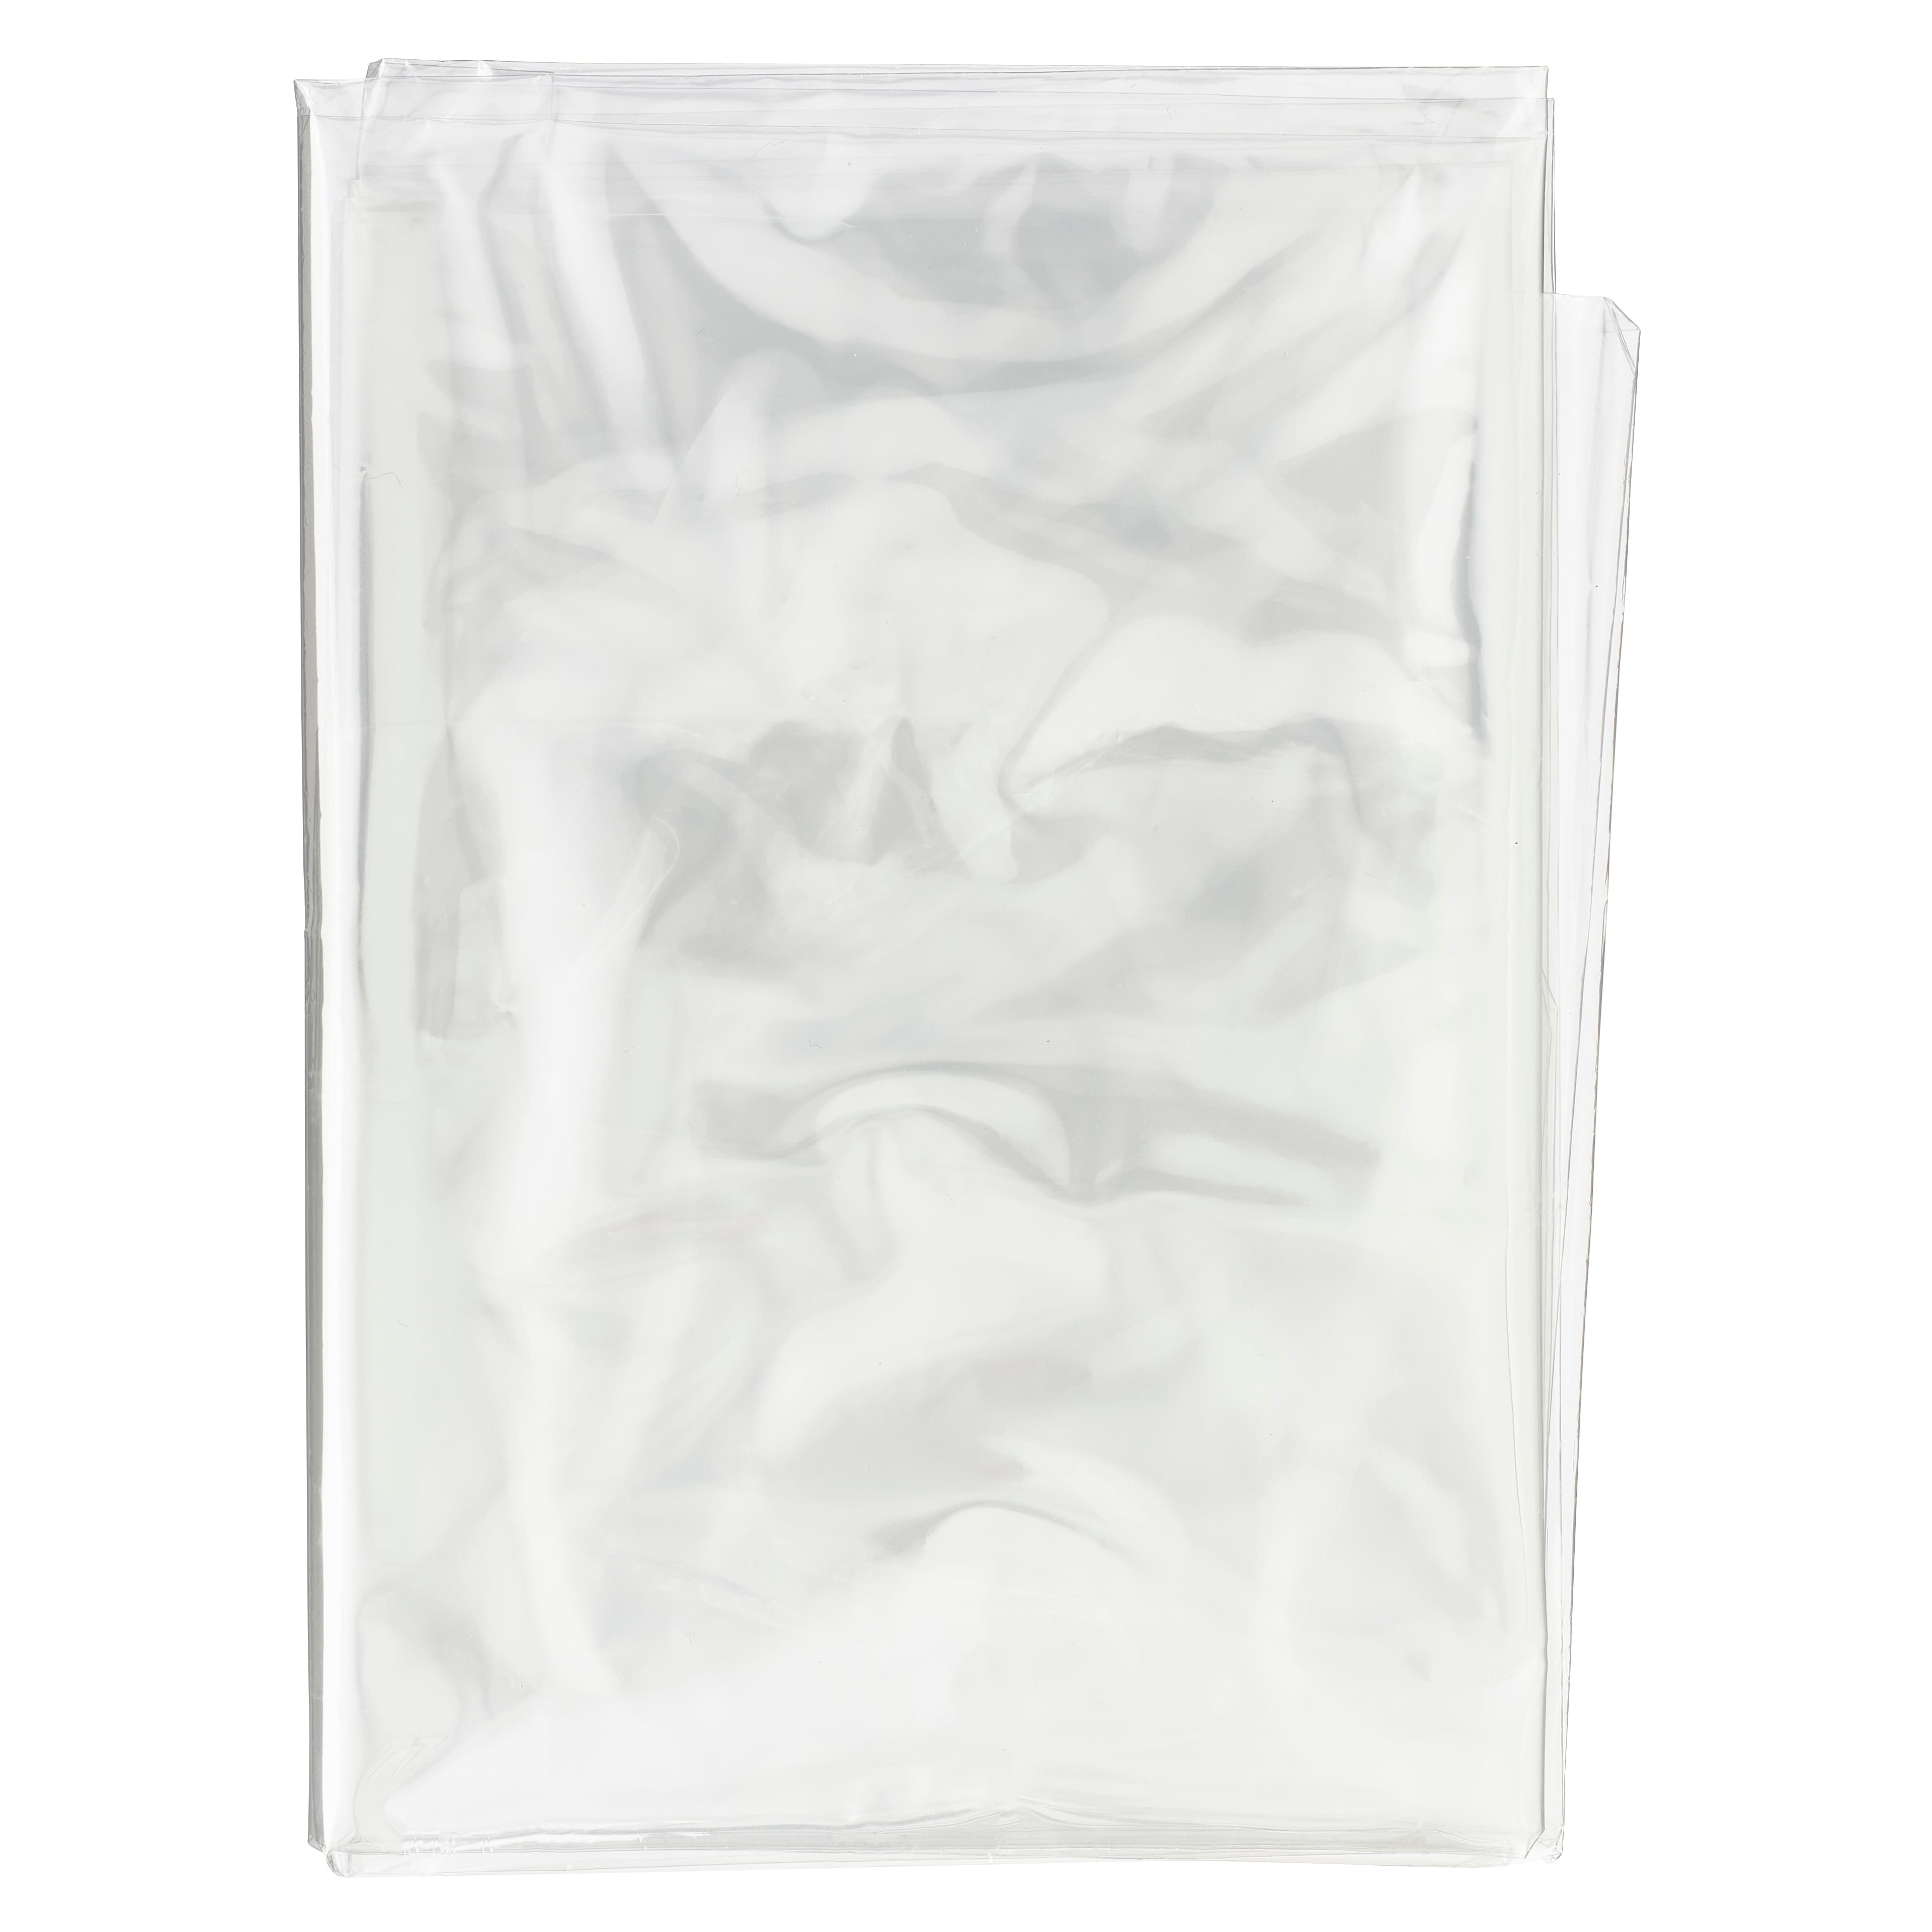 LazyMe Christmas Basket Cellophane Shrink Bags, 24x30 inch, Shrink Wrap  Bags Large, Clear (5Pcs)